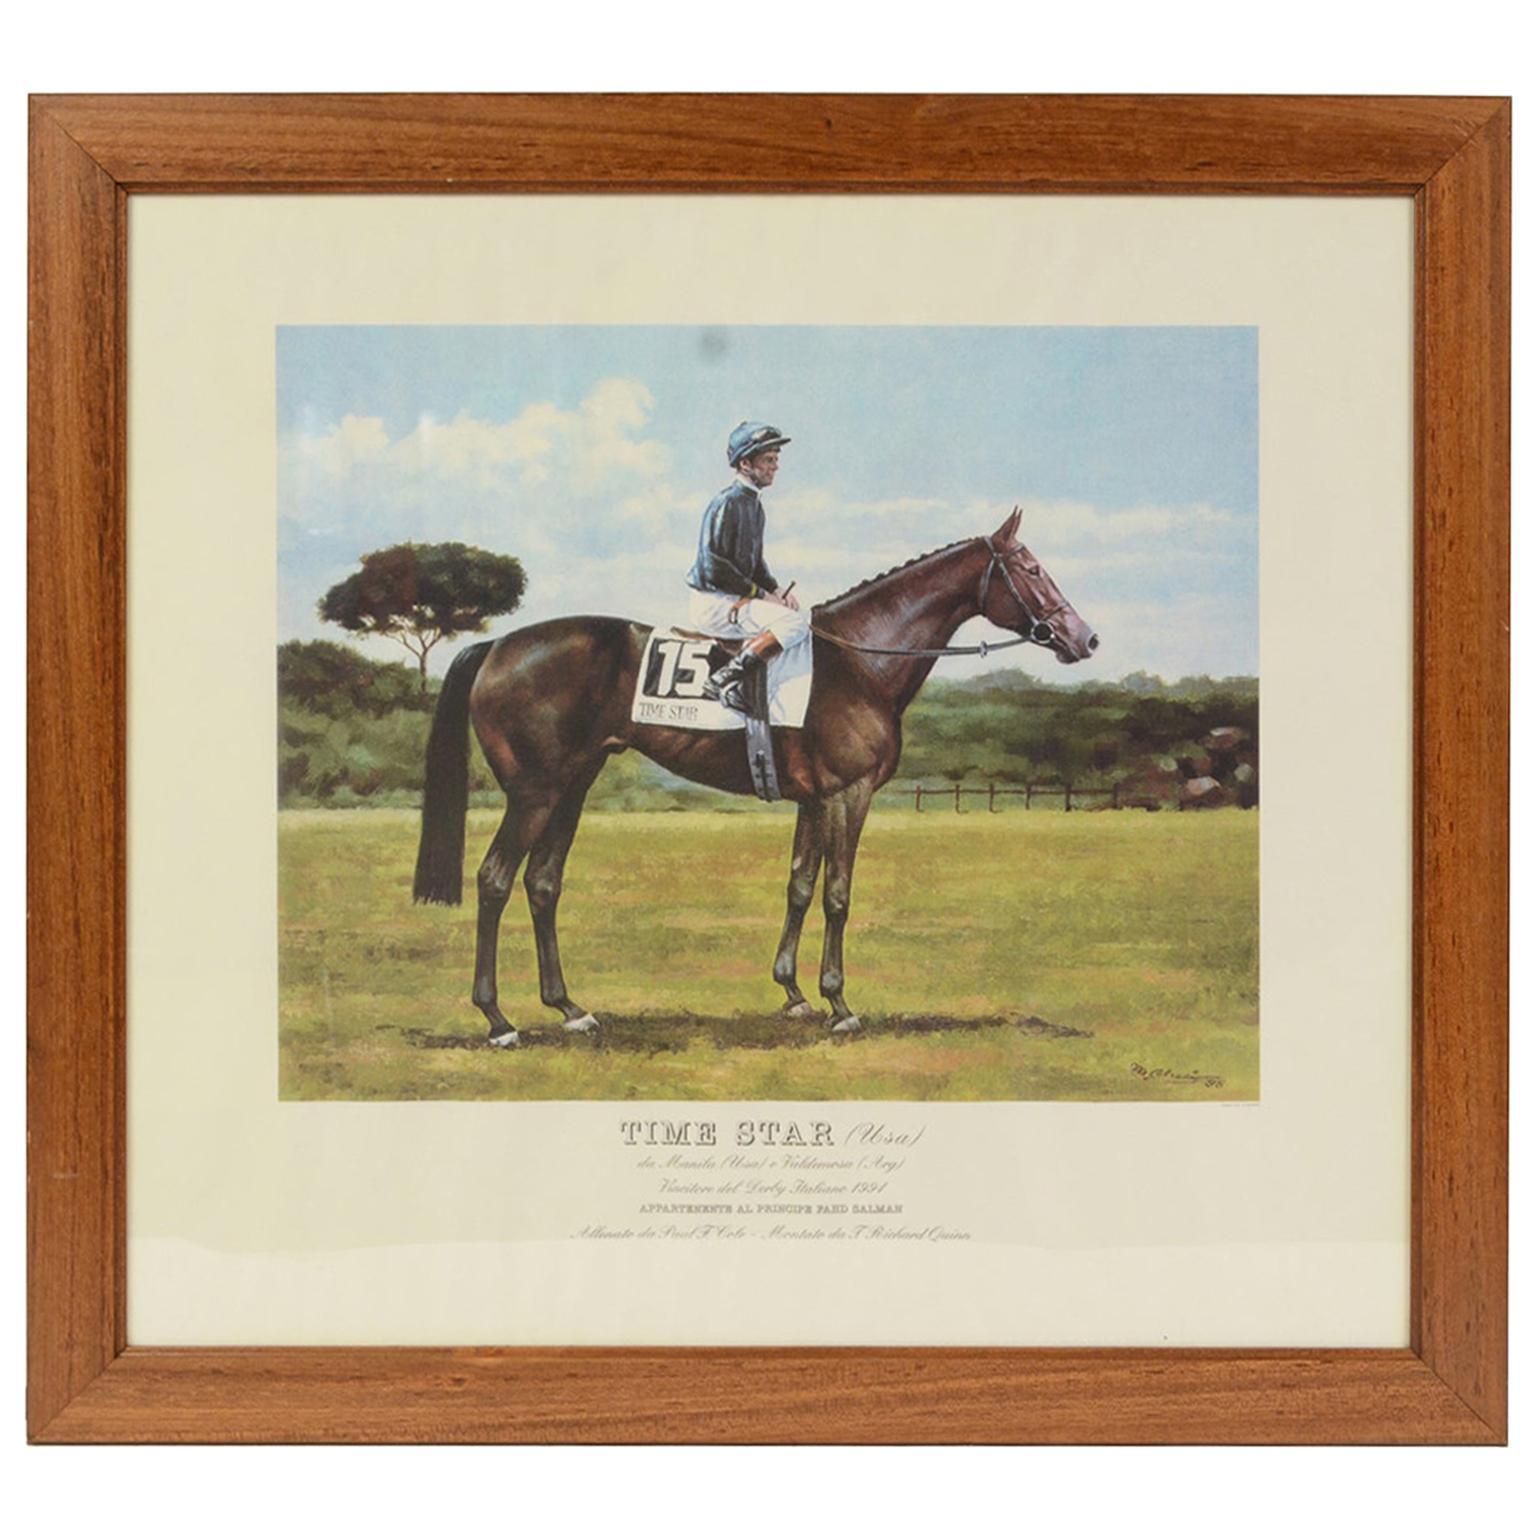 Lithograph Depicting the Horse Winner of the 1994 Italian Derby